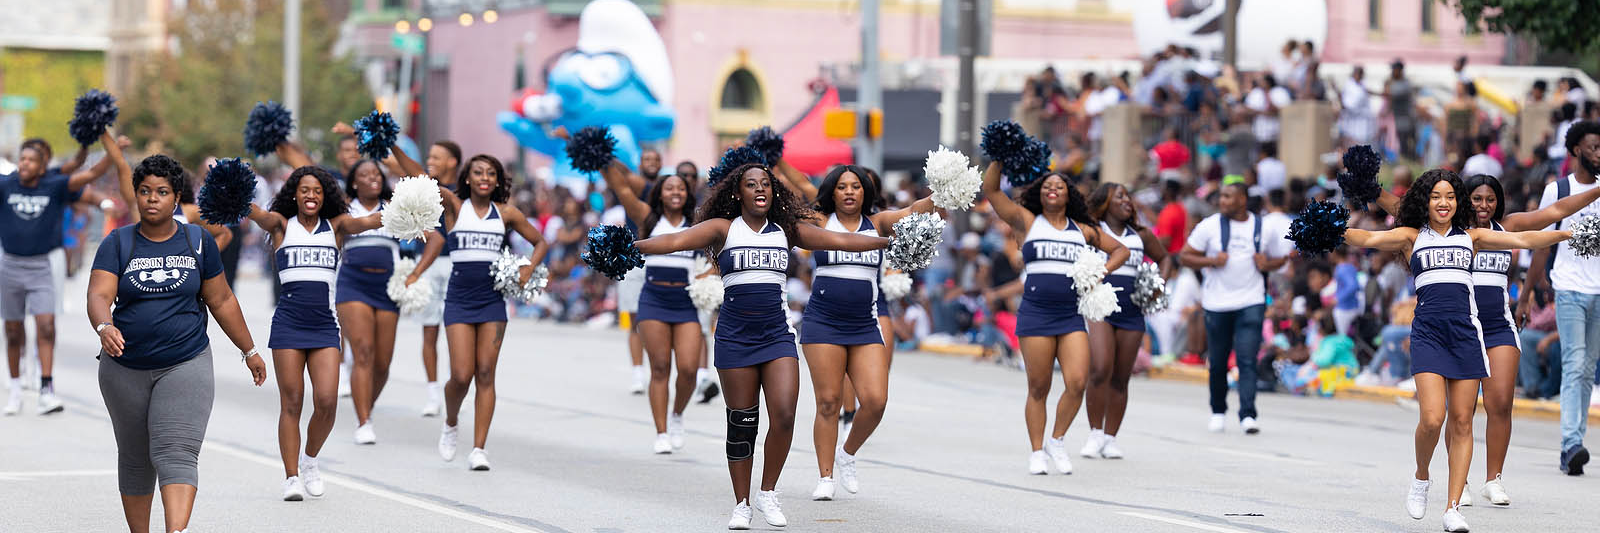 Stock photo of cheerleaders and parade participants from Circle City Classic, purchased from Big Stock